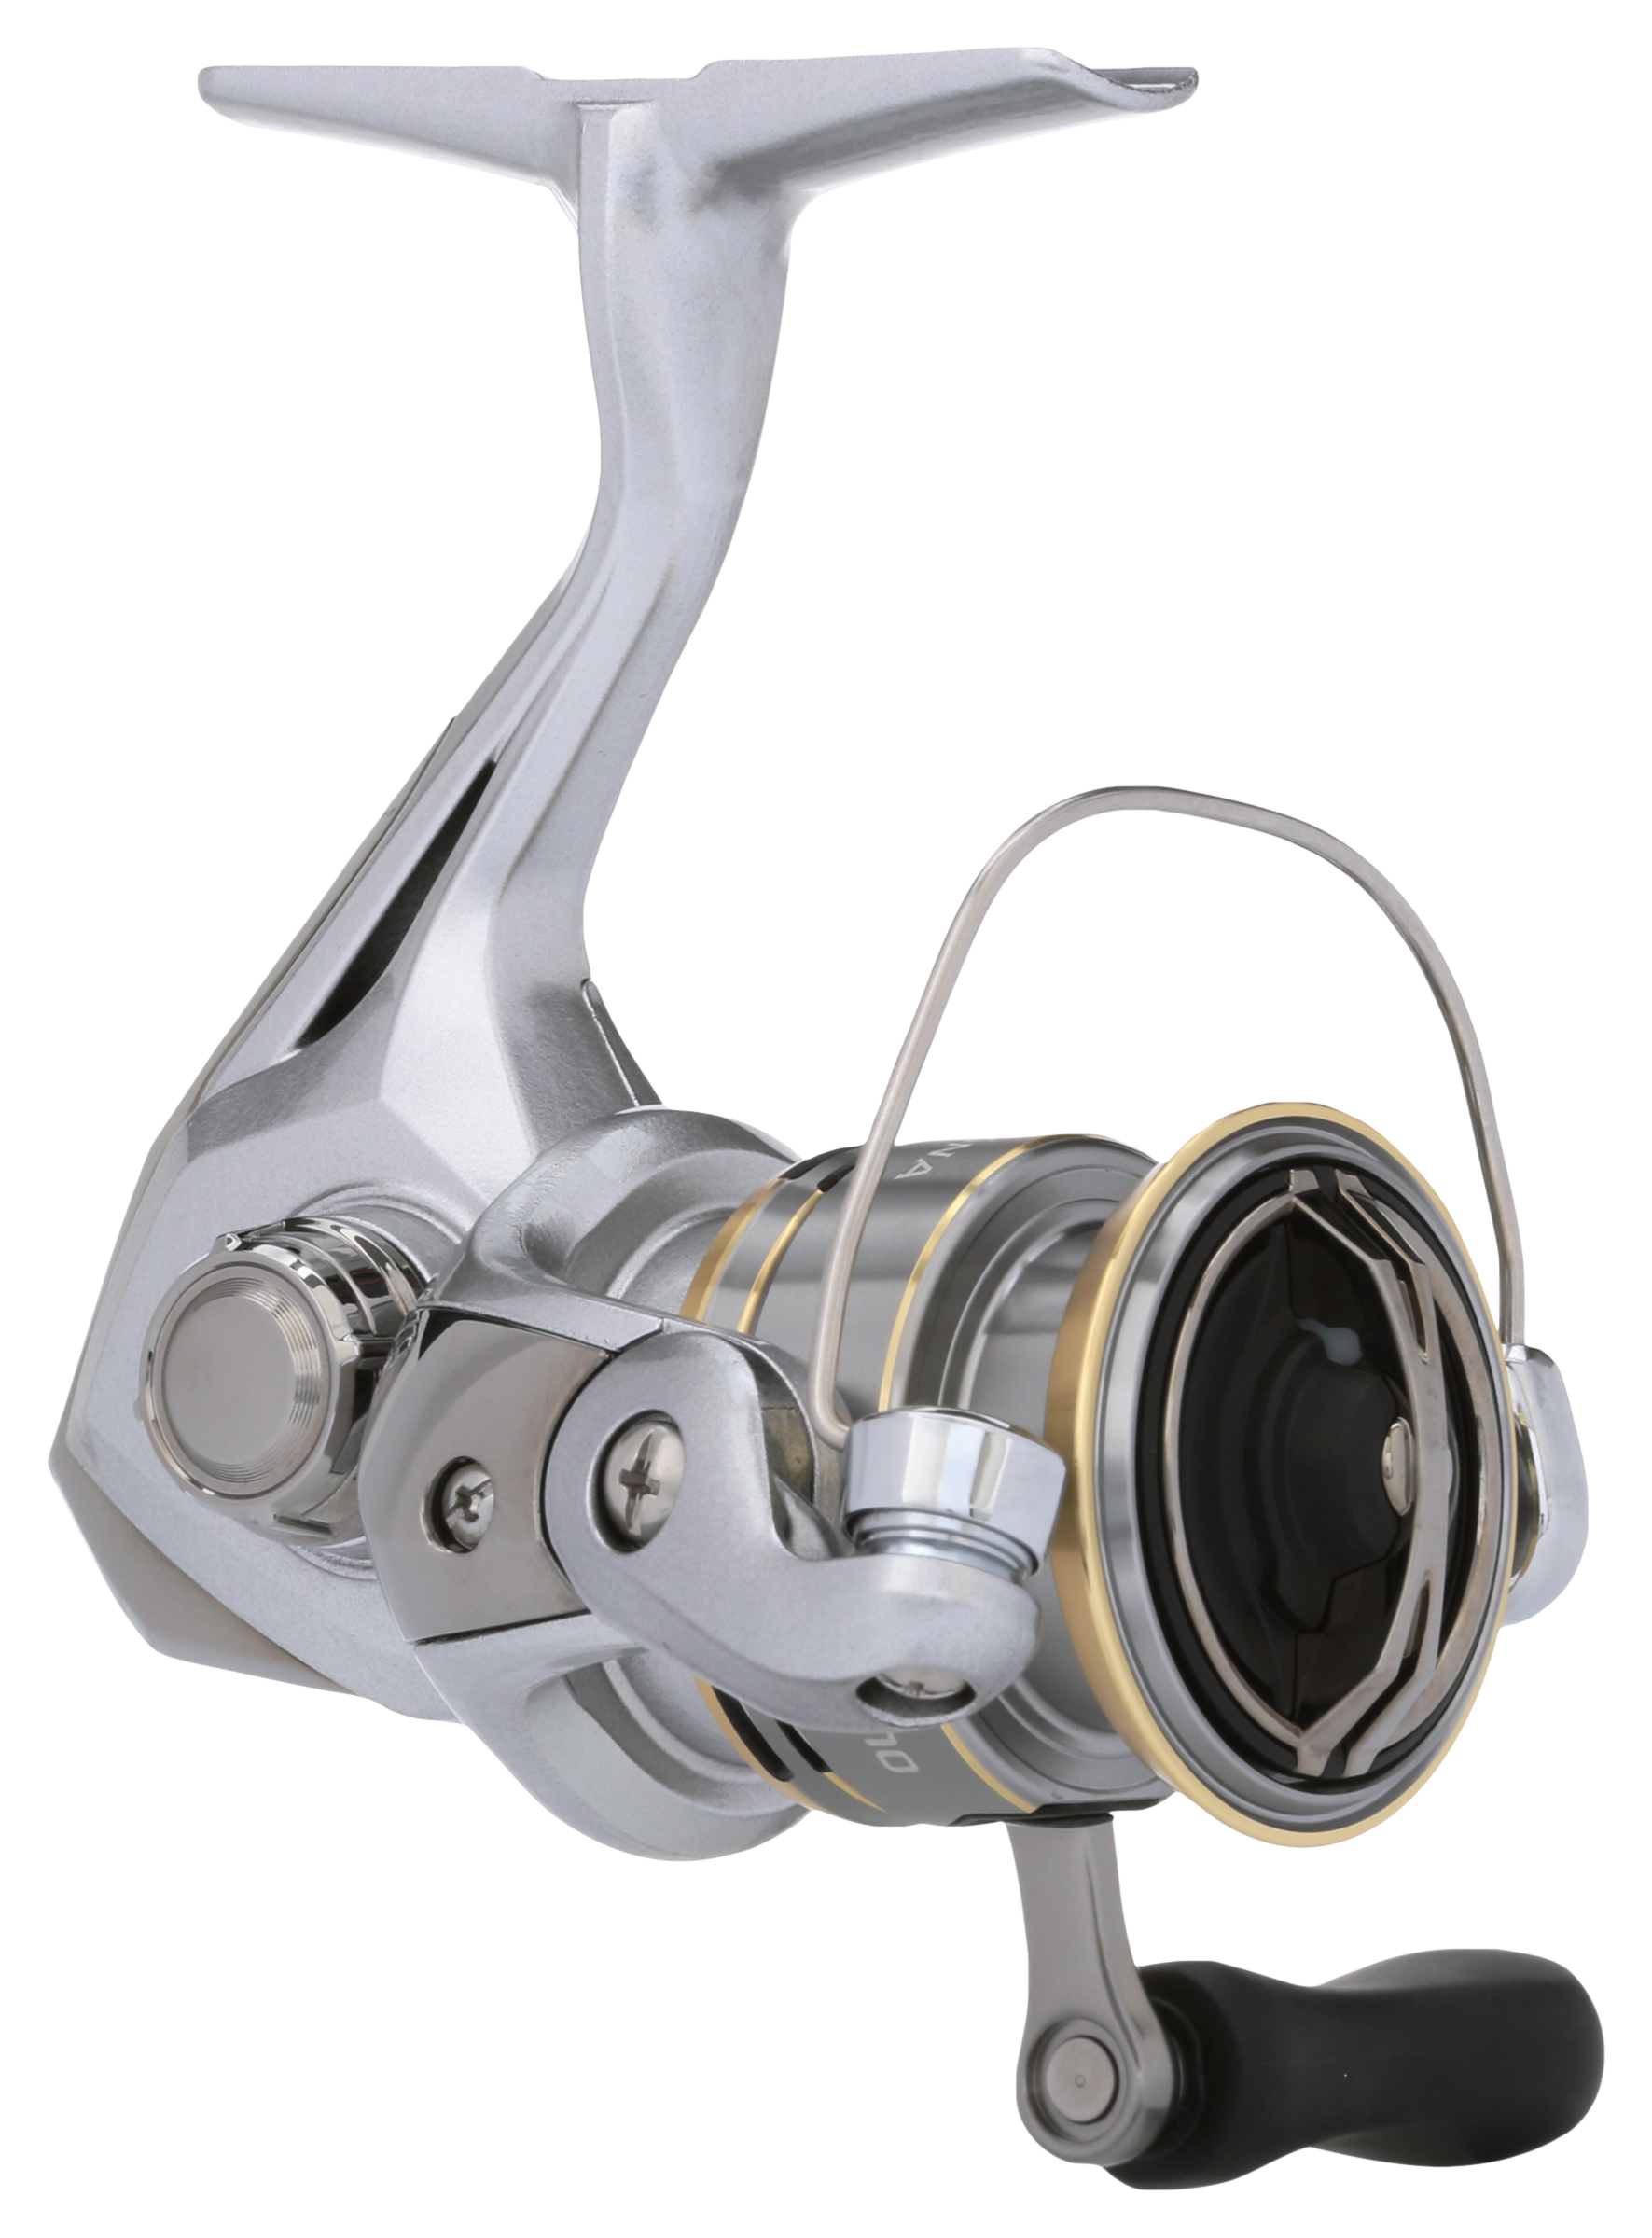 Bass Pro Shops Johnny Morris Signature Series Spinning Reel